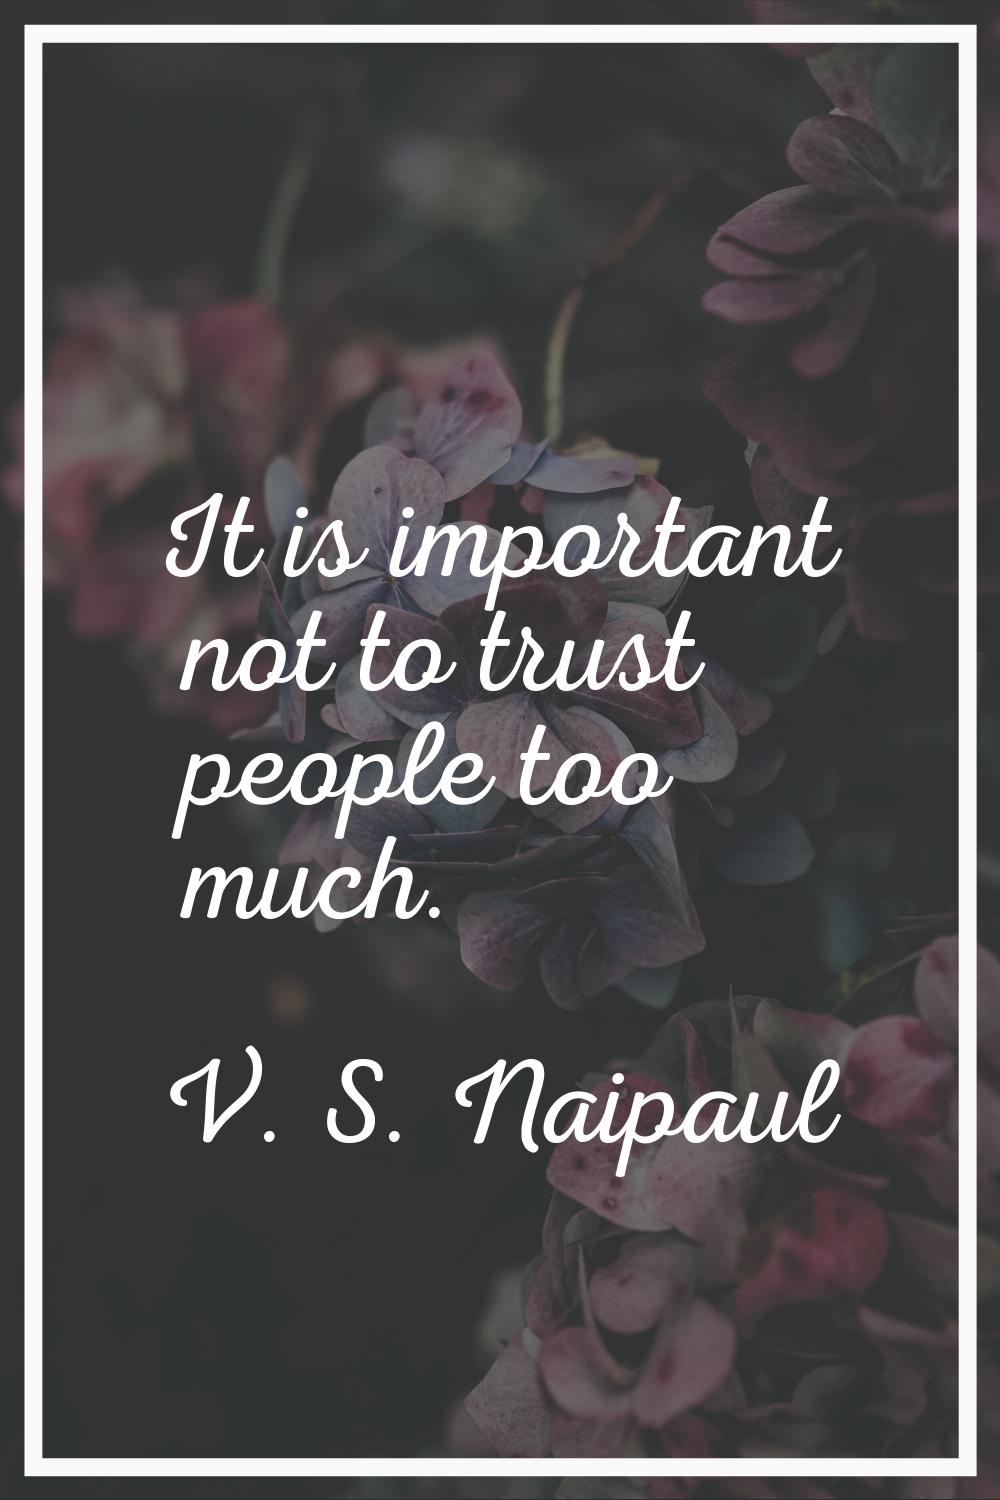 It is important not to trust people too much.